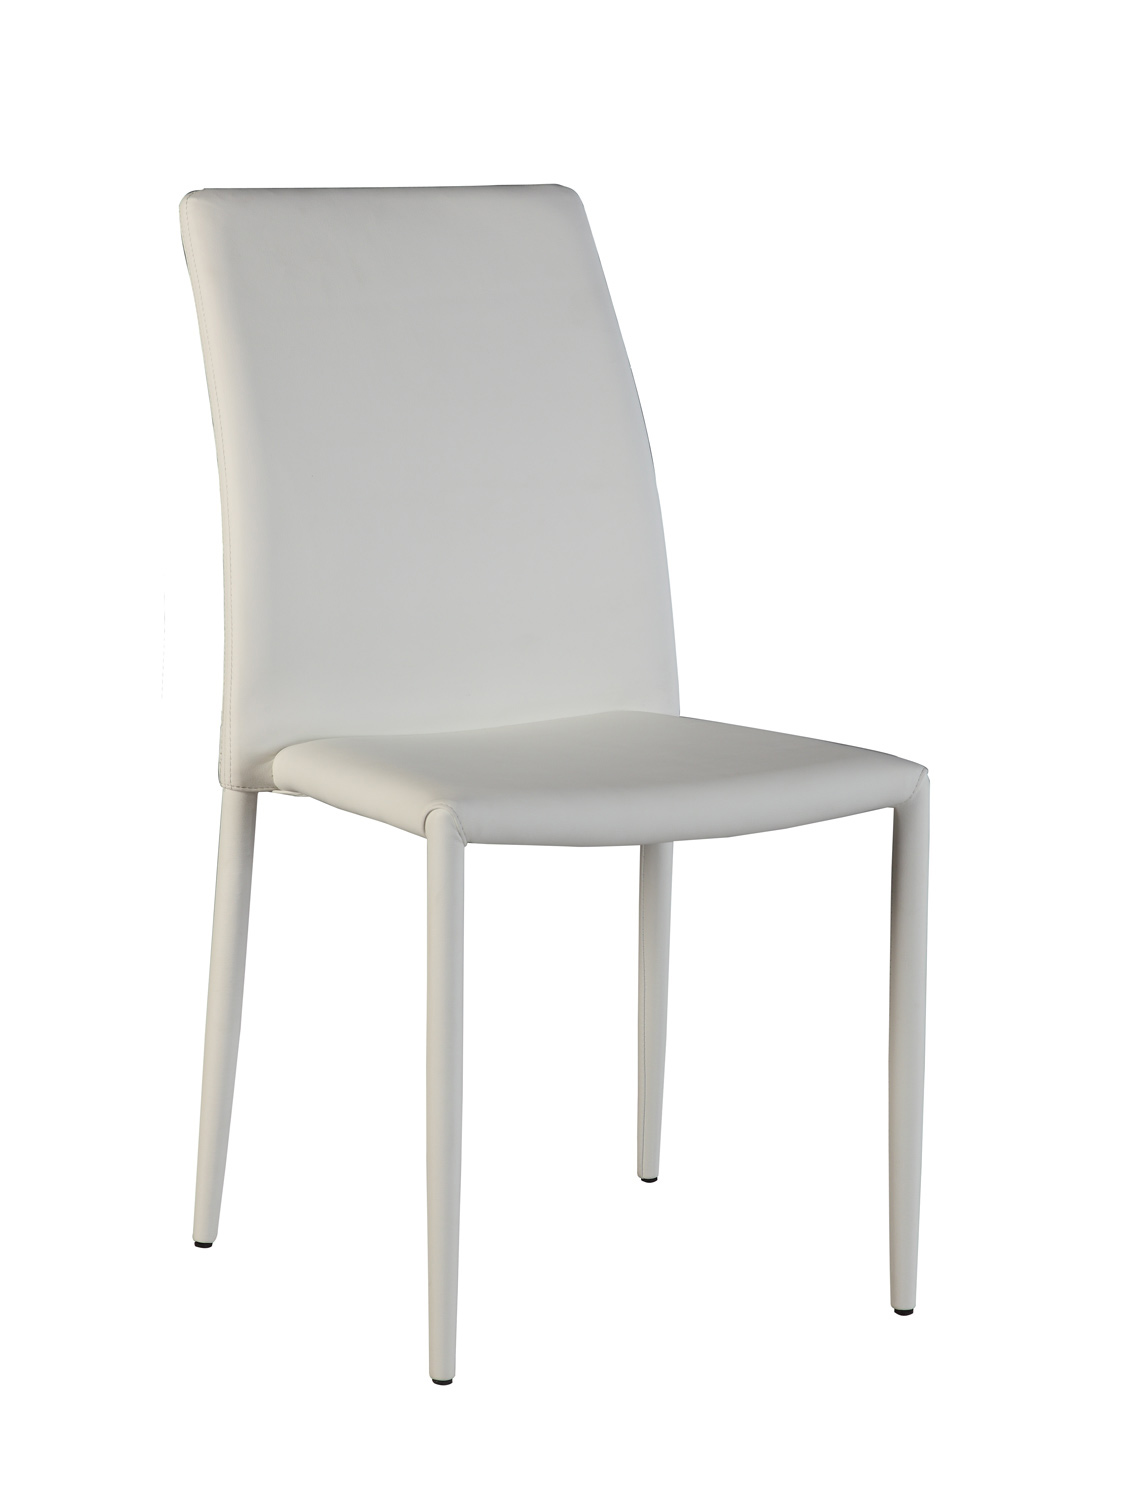 Chintaly Imports Flona Upholstered Back Side Chair - White